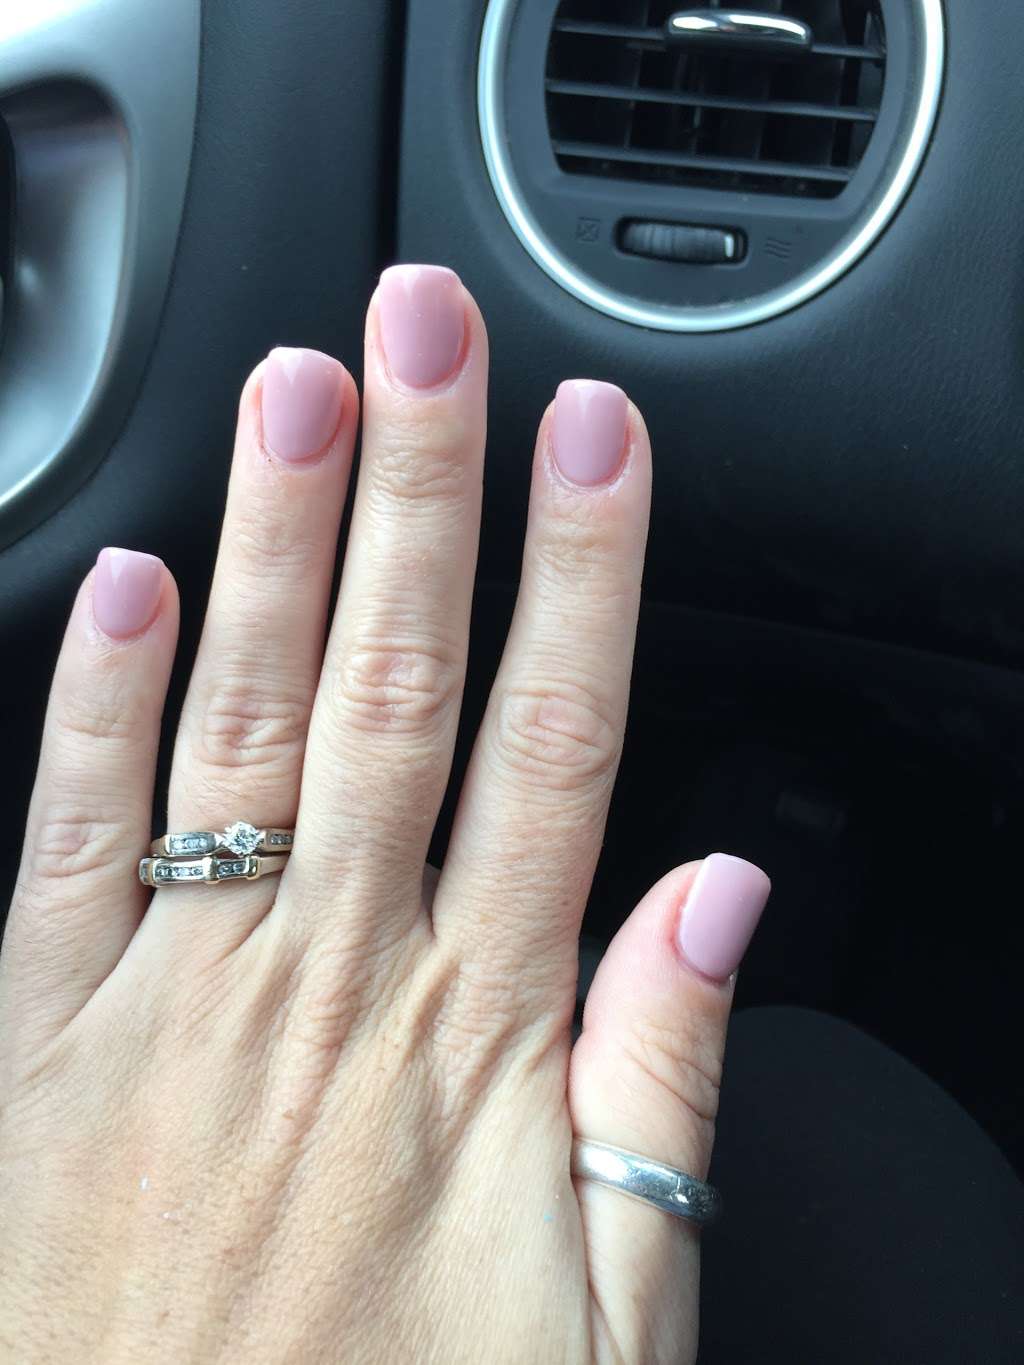 Crystals Nails | 3141 FM 528 Rd, Friendswood, TX 77546 | Phone: (281) 554-5462